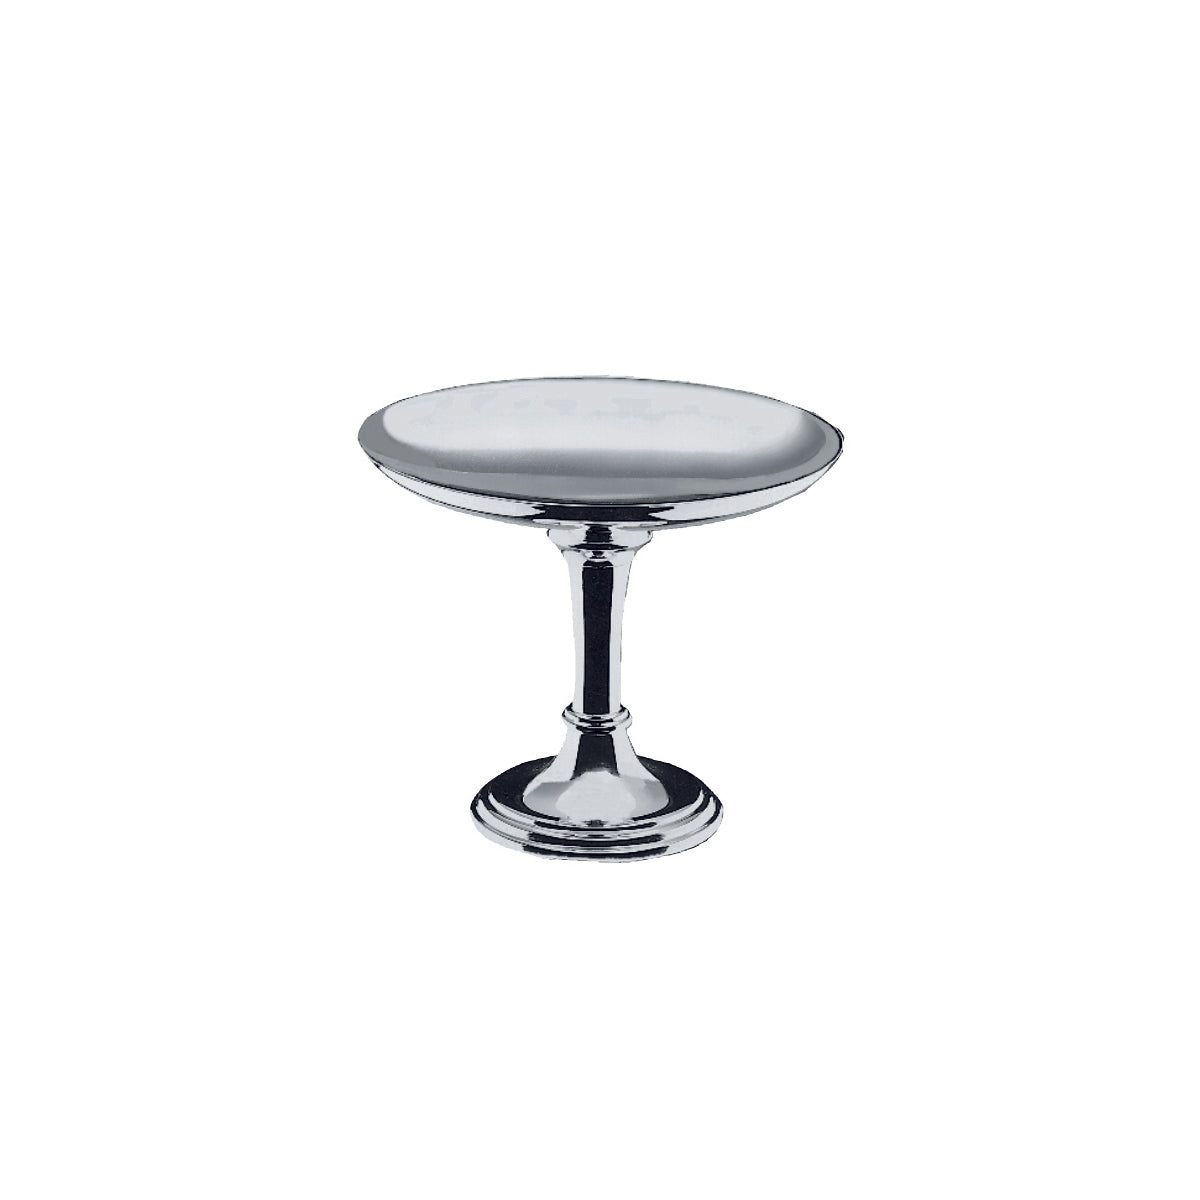 06.4379.6040 WMF Classic Petit-Fours Plate Stand Stainless Steel Tomkin Australia Hospitality Supplies